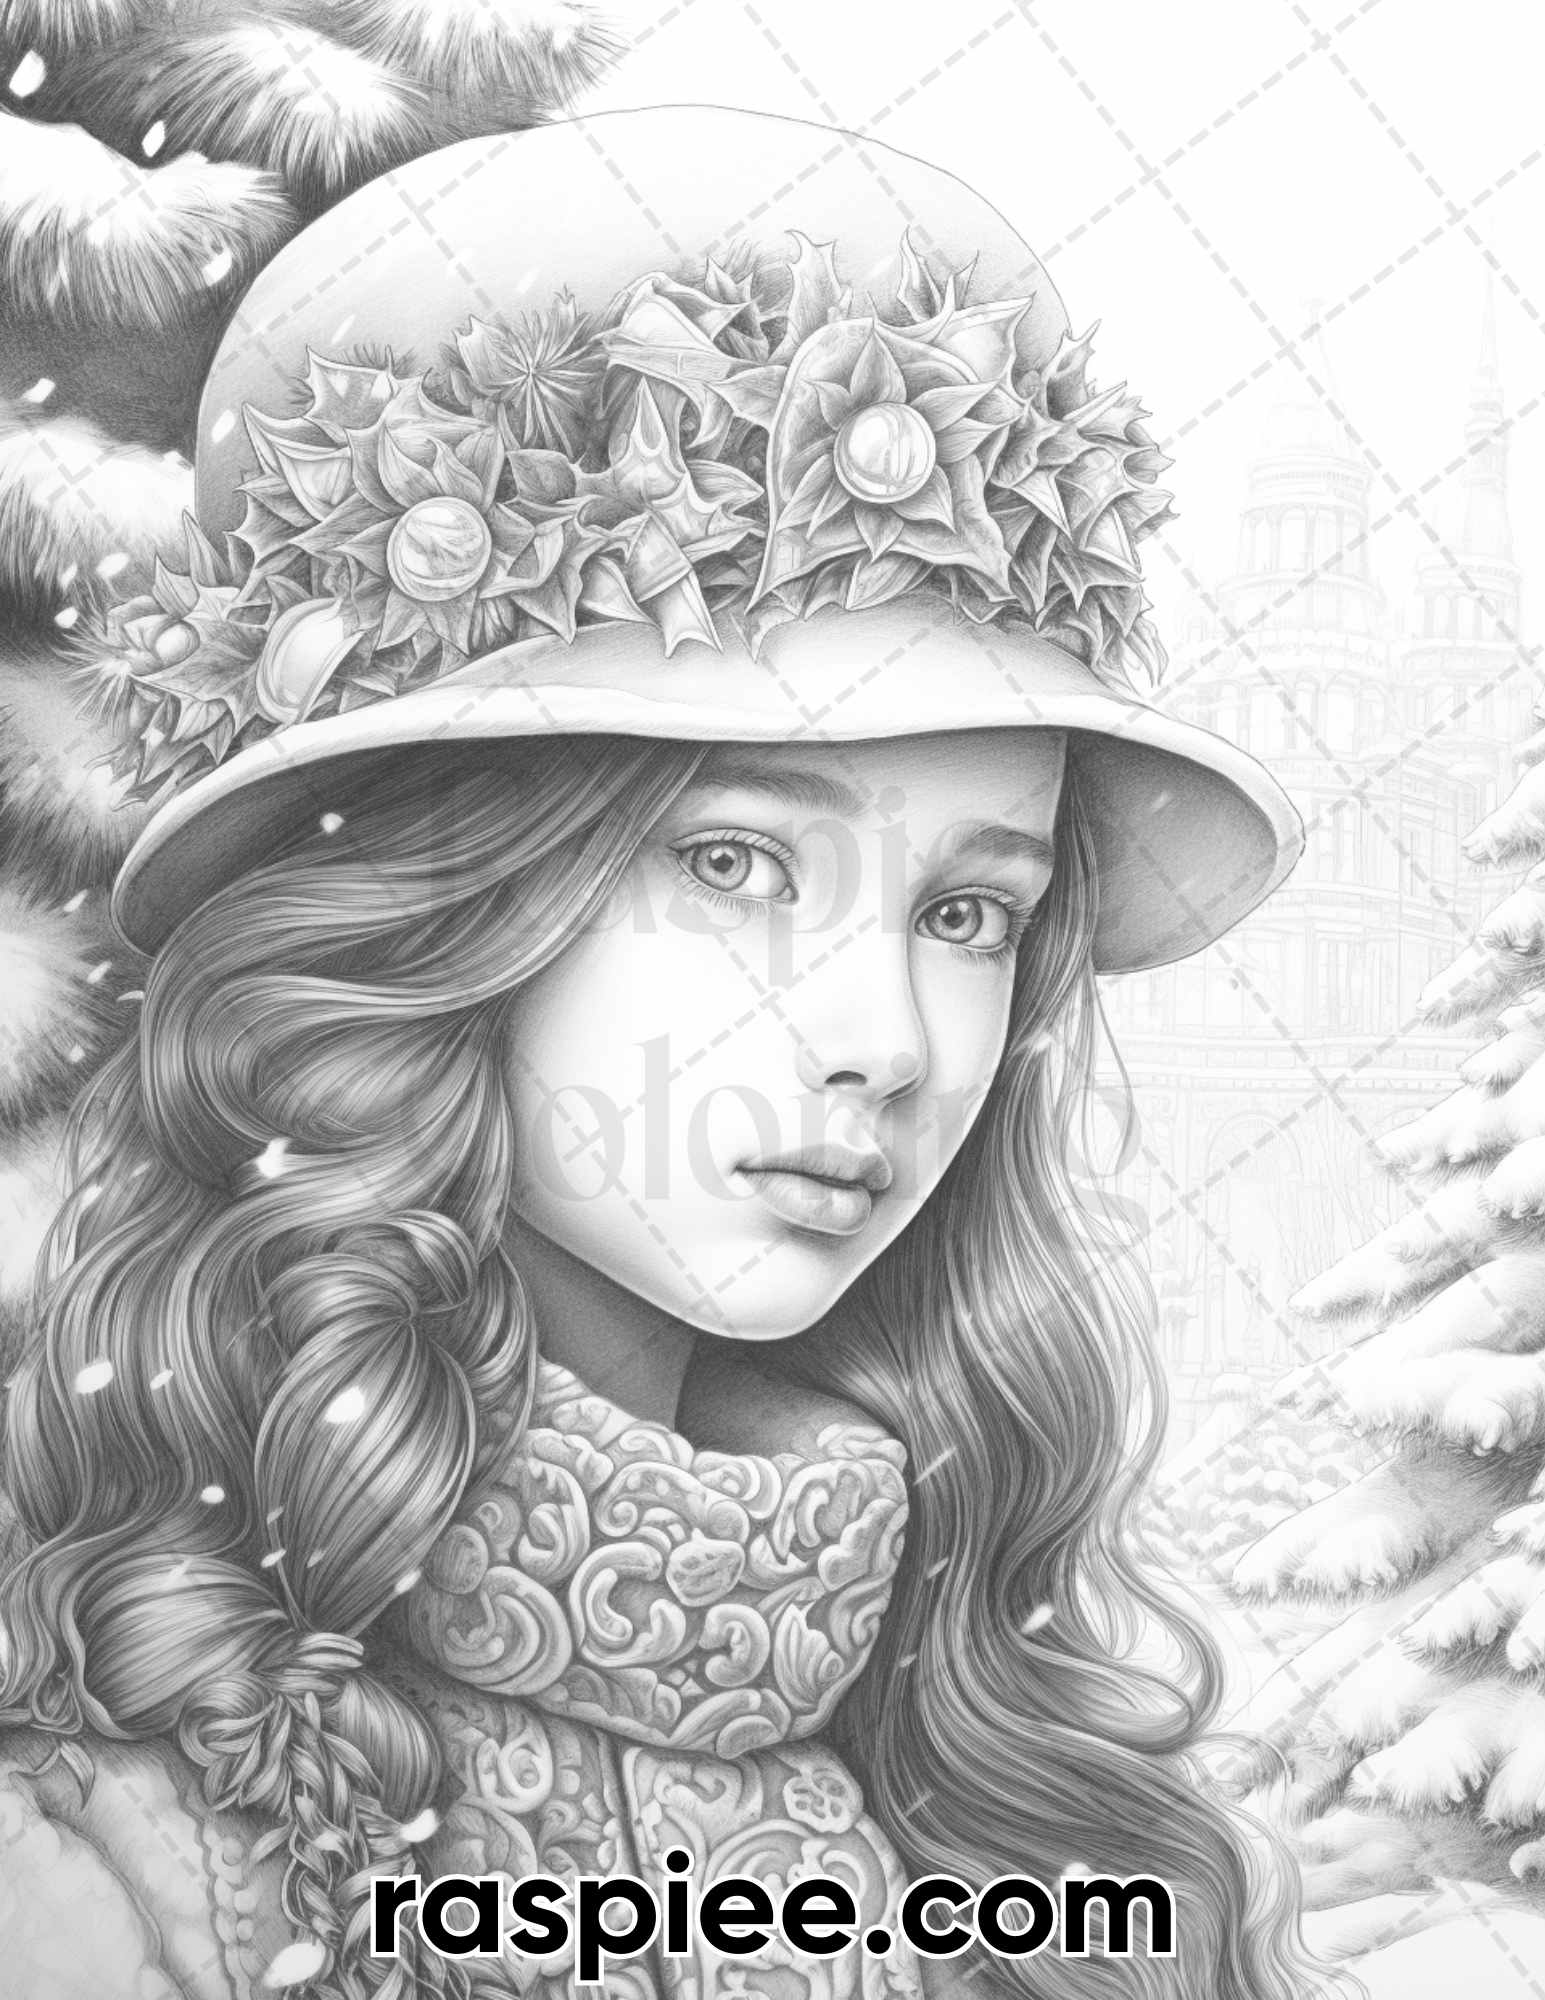 Victorian Christmas Girls Coloring Pages, Vintage Girls Coloring Activity, Portrait Coloring Pages for Adults, Christmas Coloring Pages for Adults, Xmas Coloring Pages, Christmas Coloring Book Printable, Portrait Coloring Book, Victorian Coloring Pages, Grayscale Coloring Pages